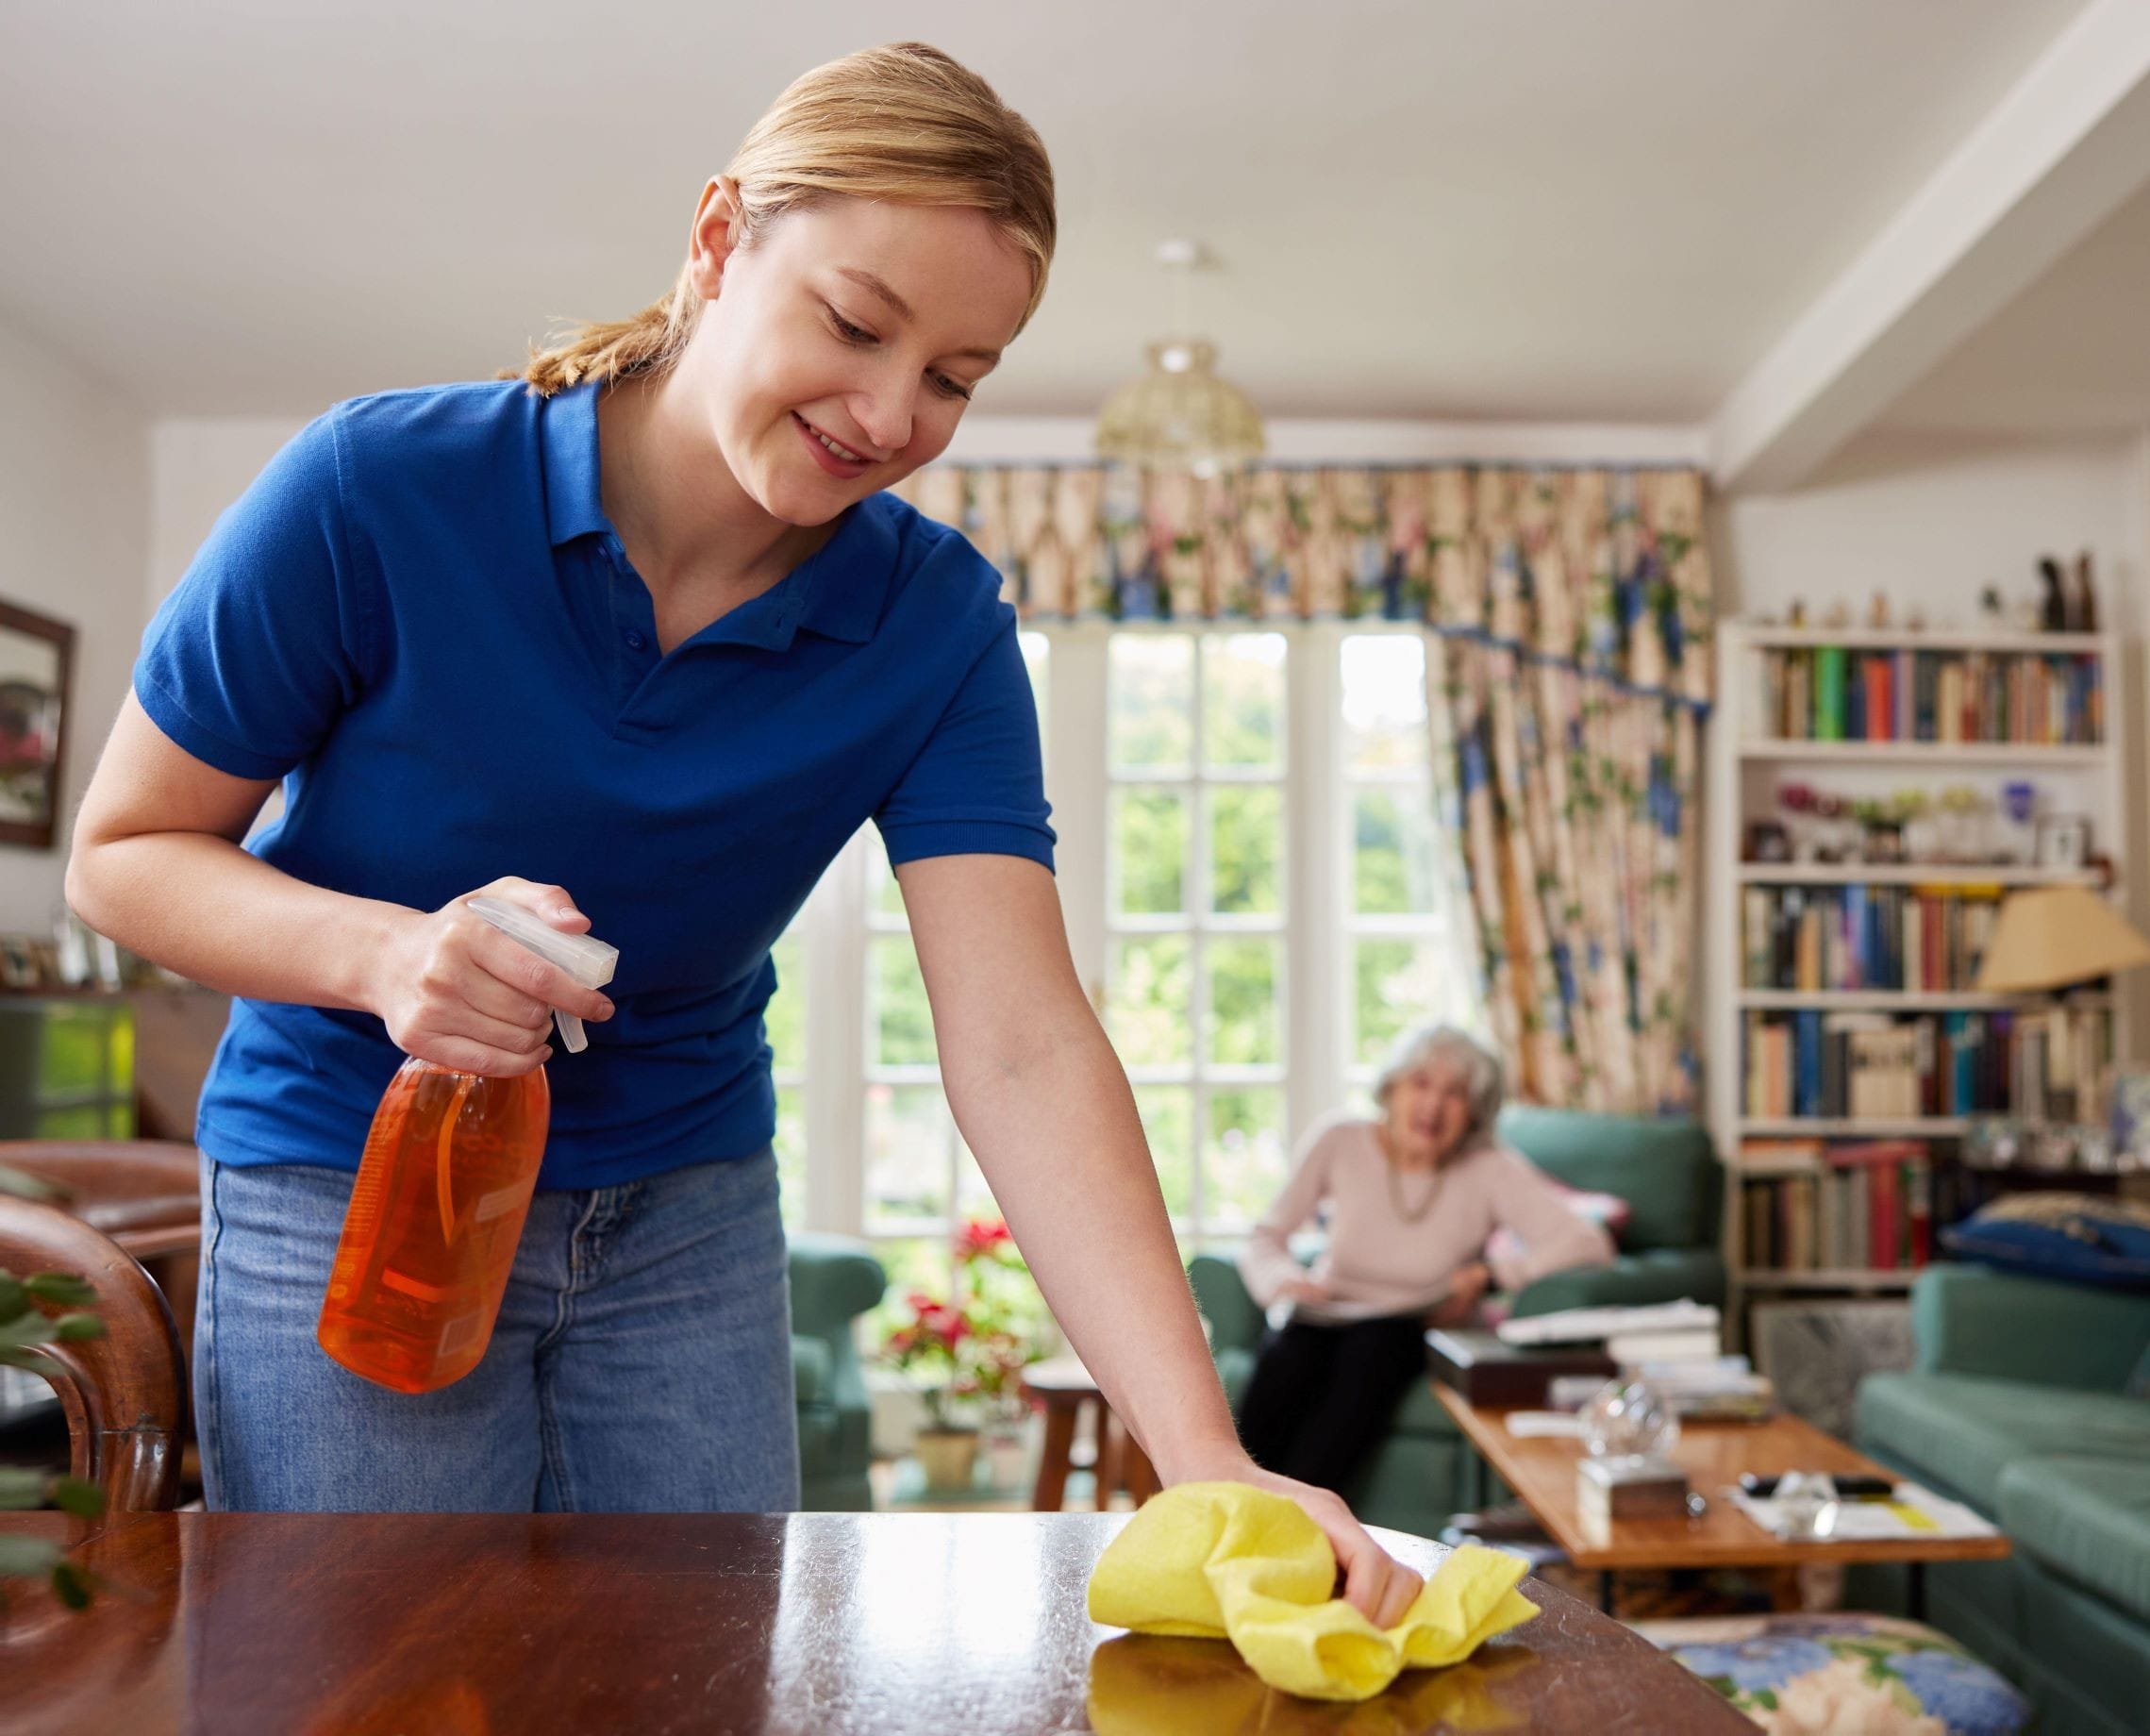 House Cleaning Services Adelaide